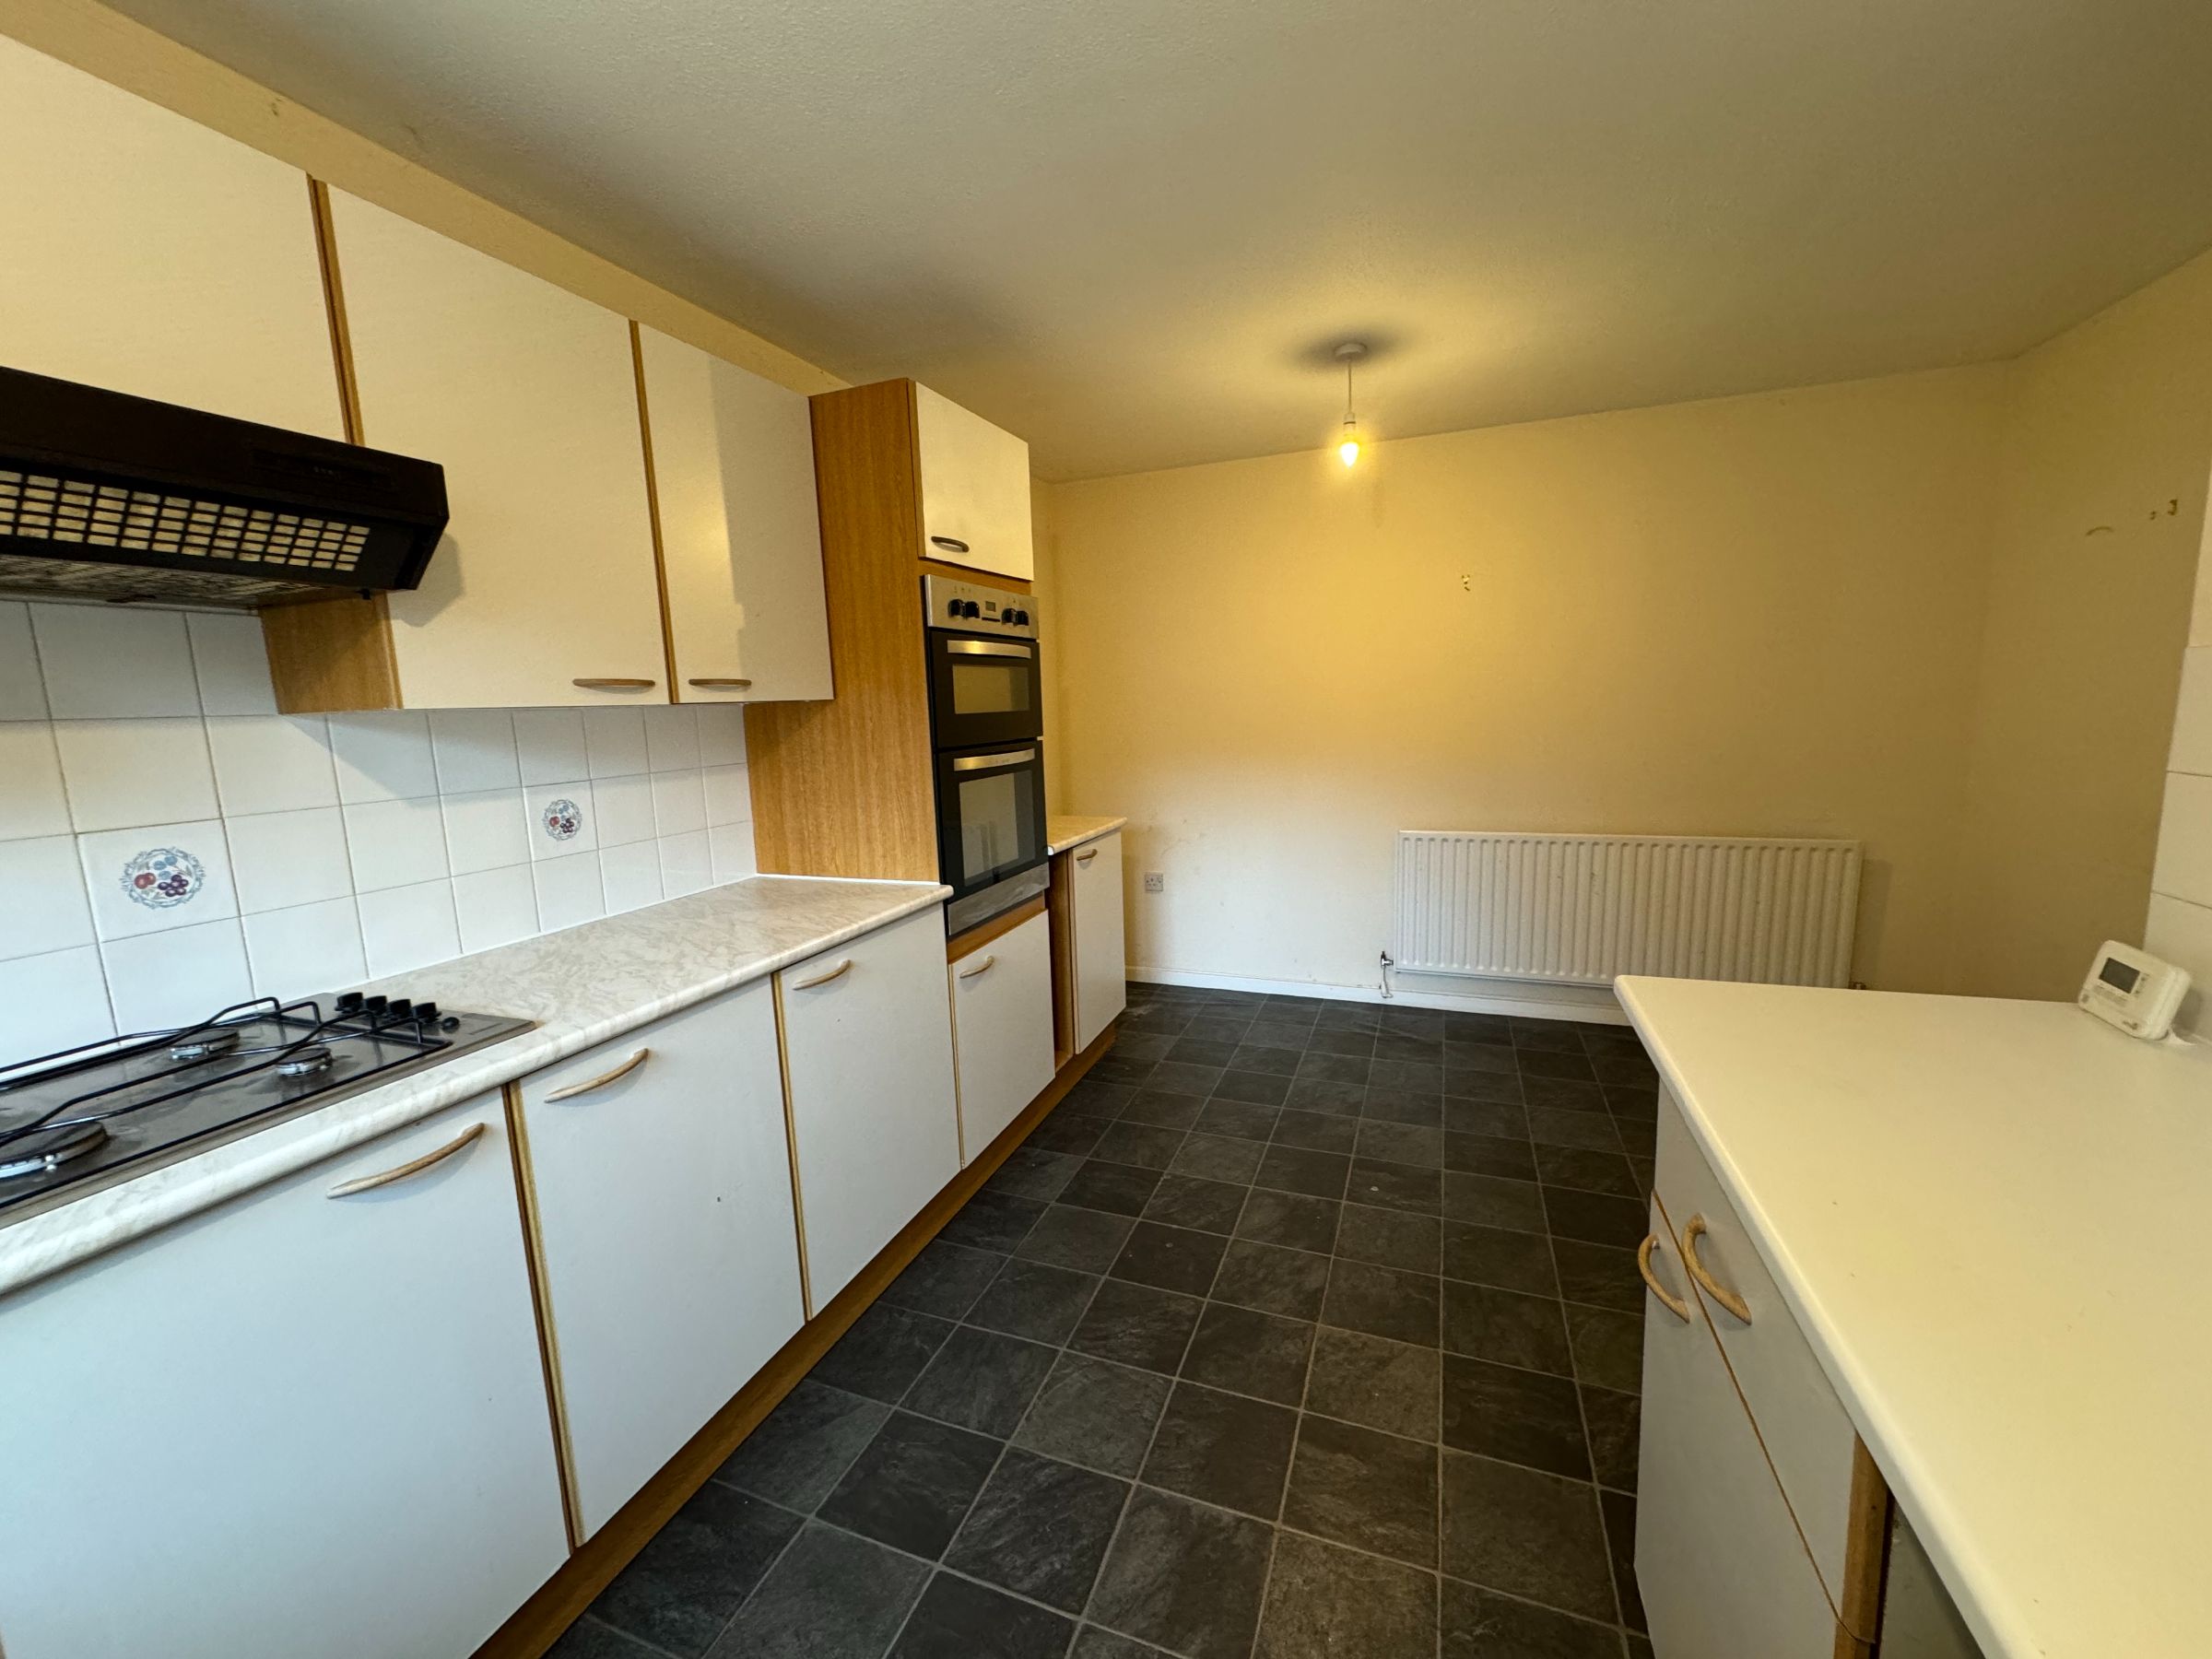 3 bed terraced house for sale in Manton, Peterborough  - Property Image 3